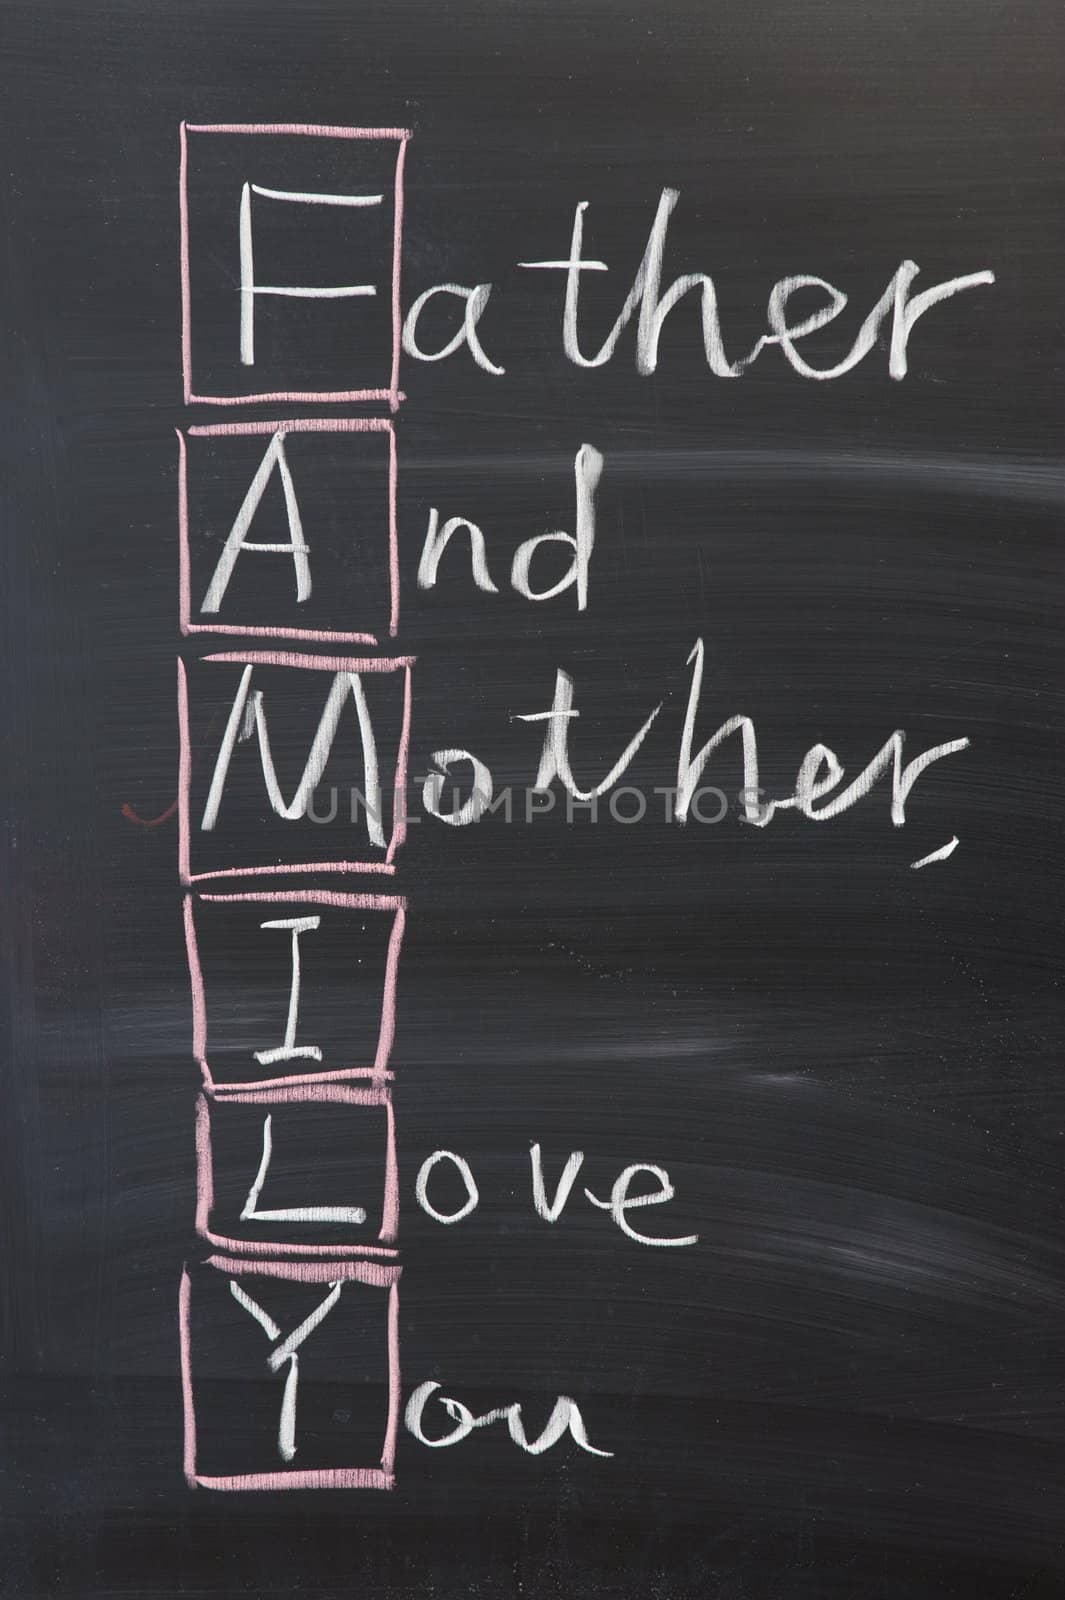 Chalkboard writing - Family (Father and mother, I love you) concept